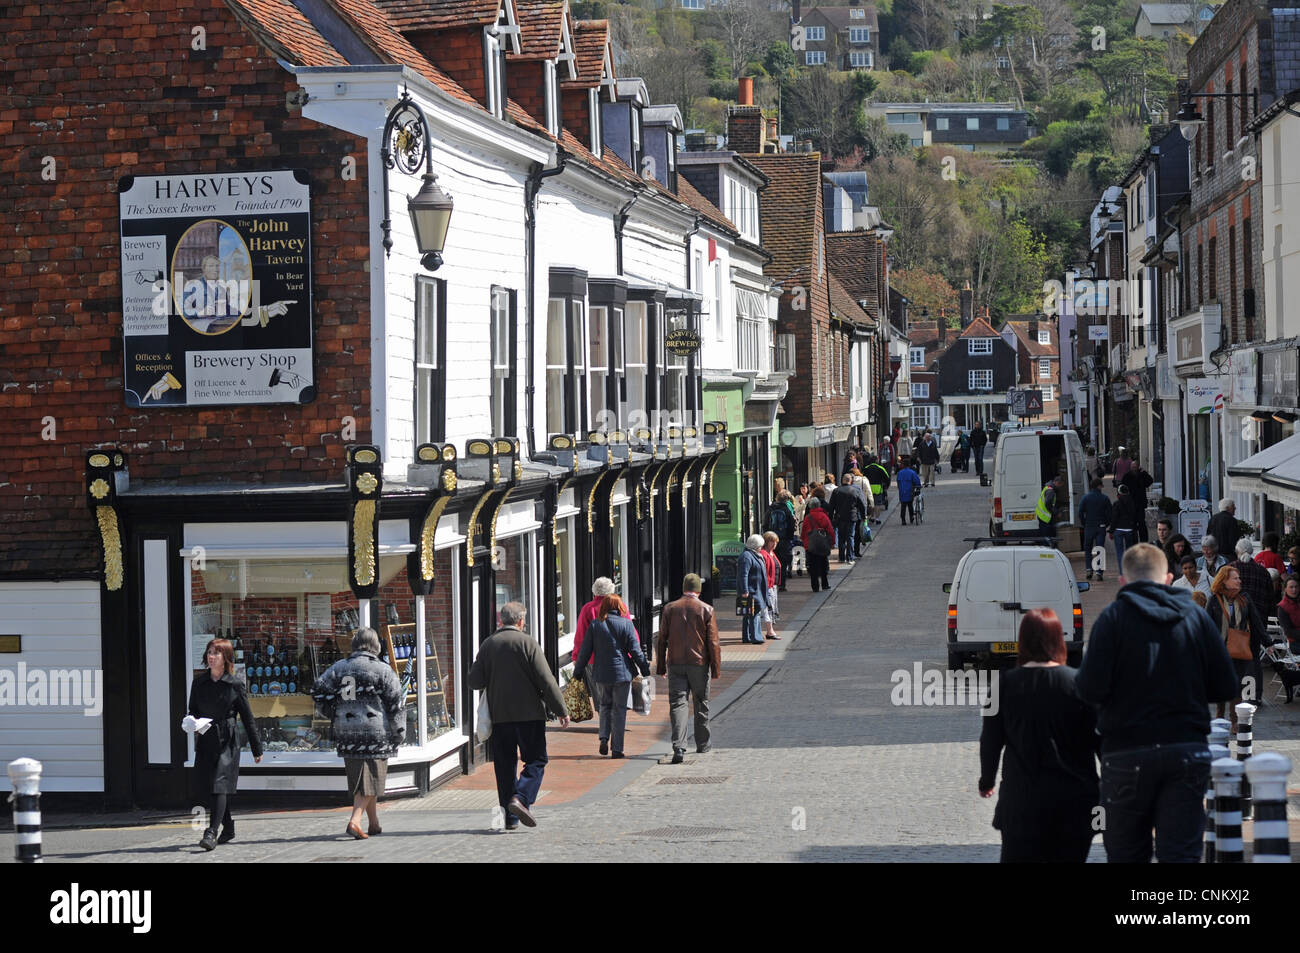 Lewes Town Centre East Sussex UK - Cliffe High Street with the famous harveys Brewery shop on left Stock Photo